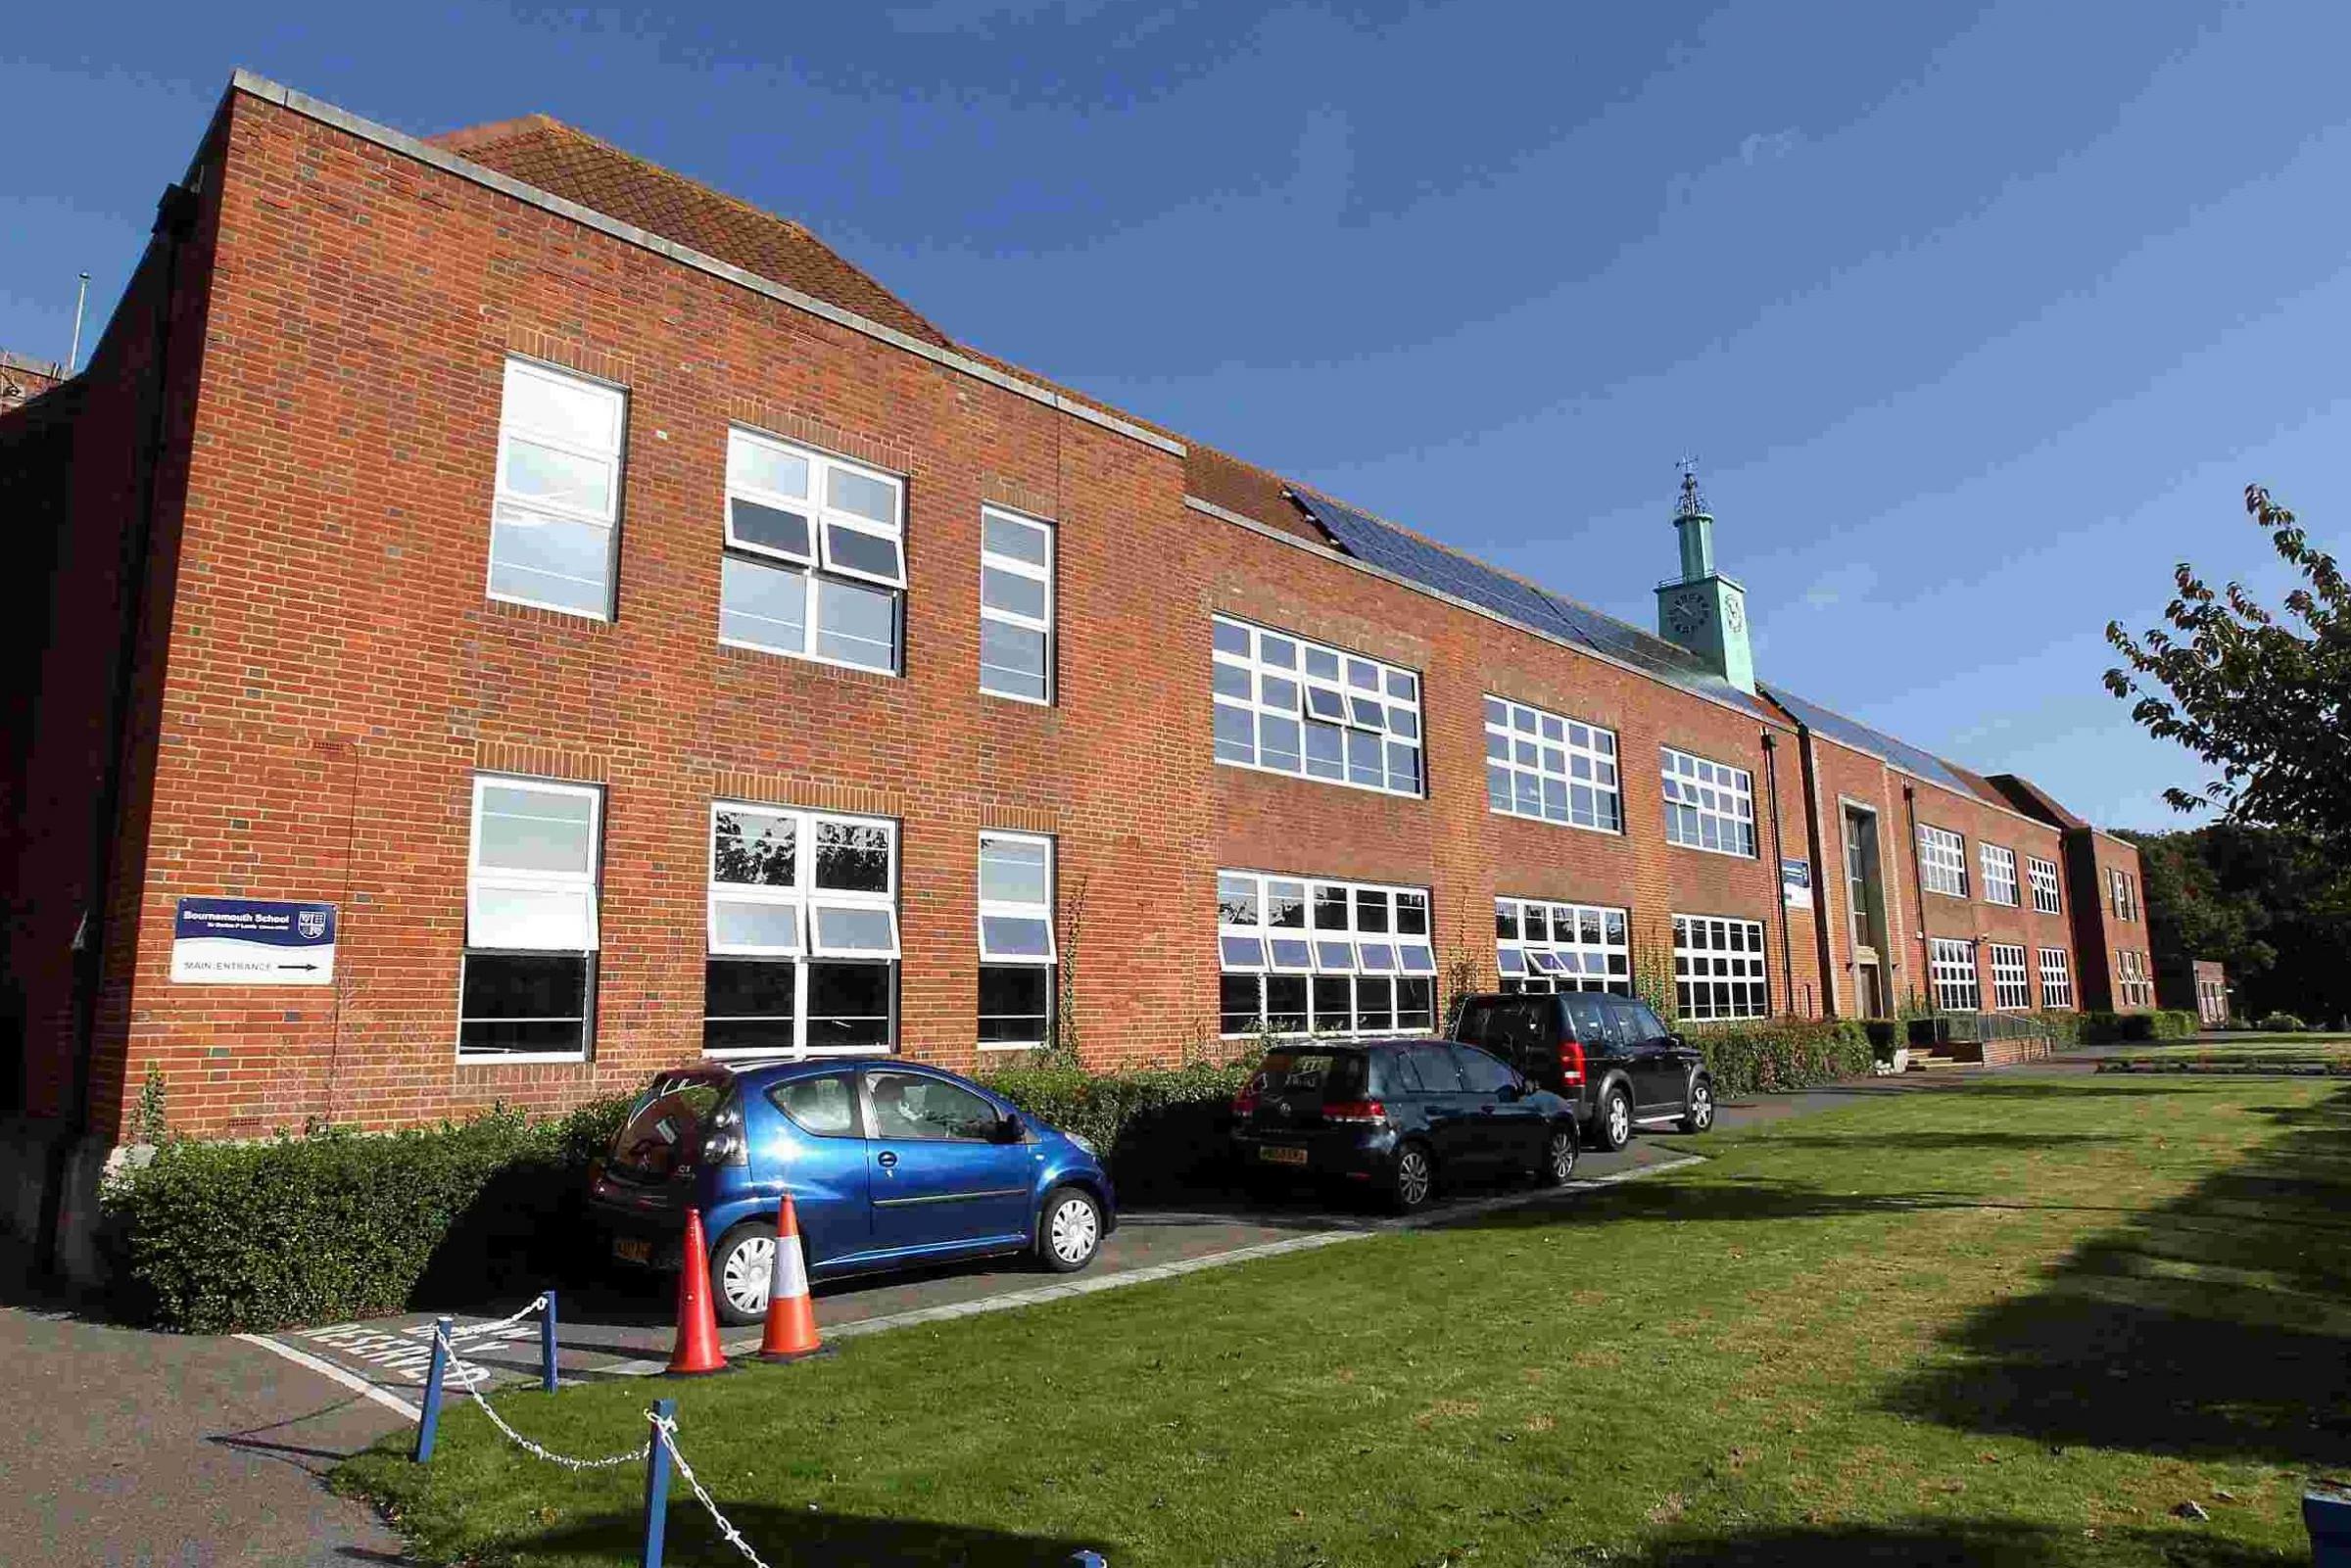 Bournemouth grammar school gets £3.9million to expand - and admit 'disadvantaged' pupils